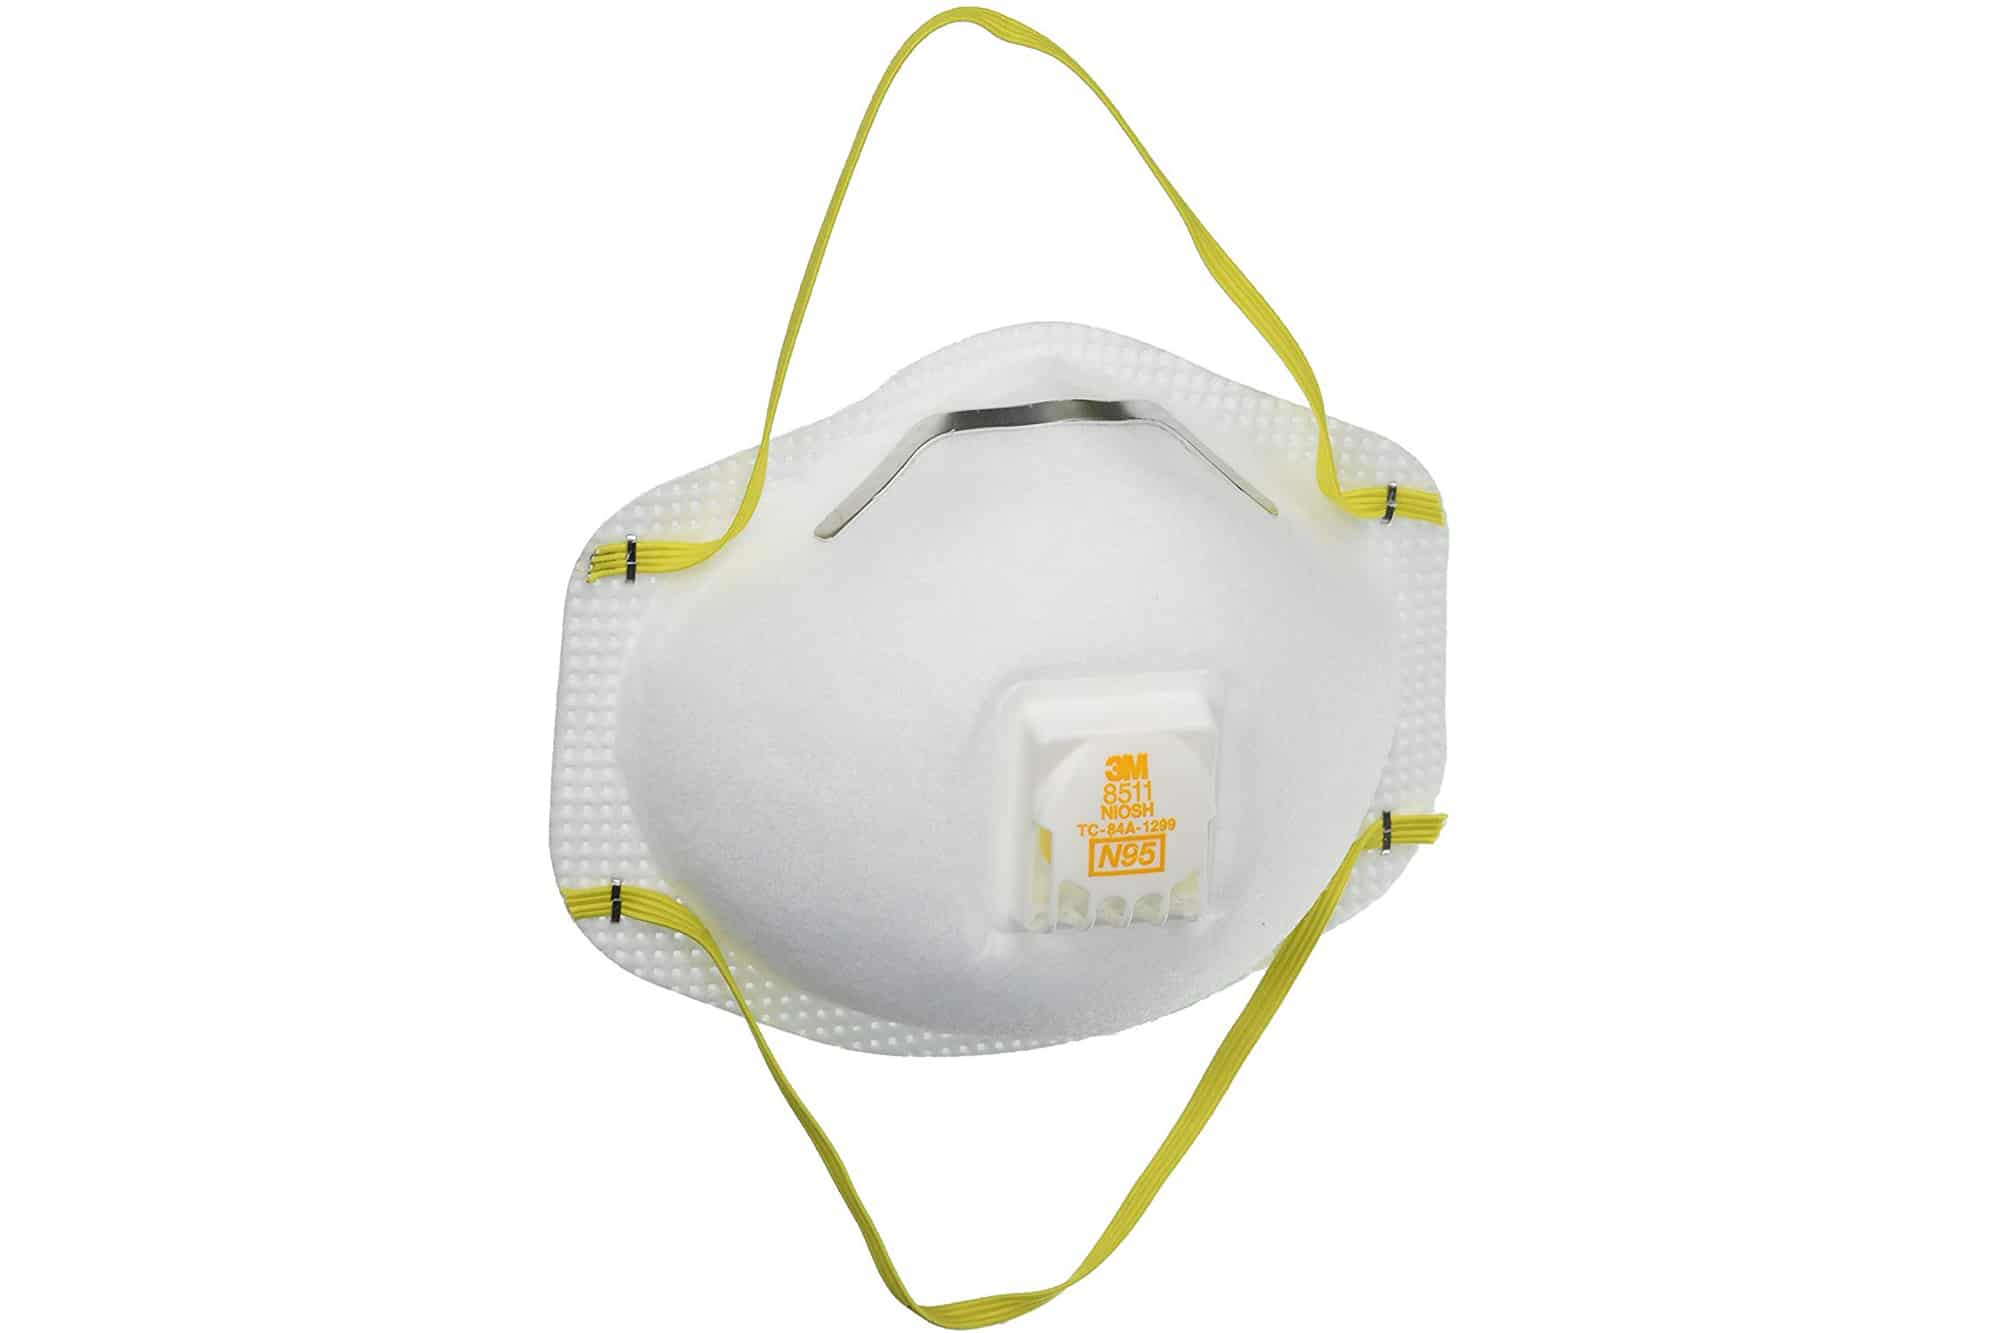 3M Particulate Respirator 8511 N95 with 3M Cool Flow Exhalation Valve